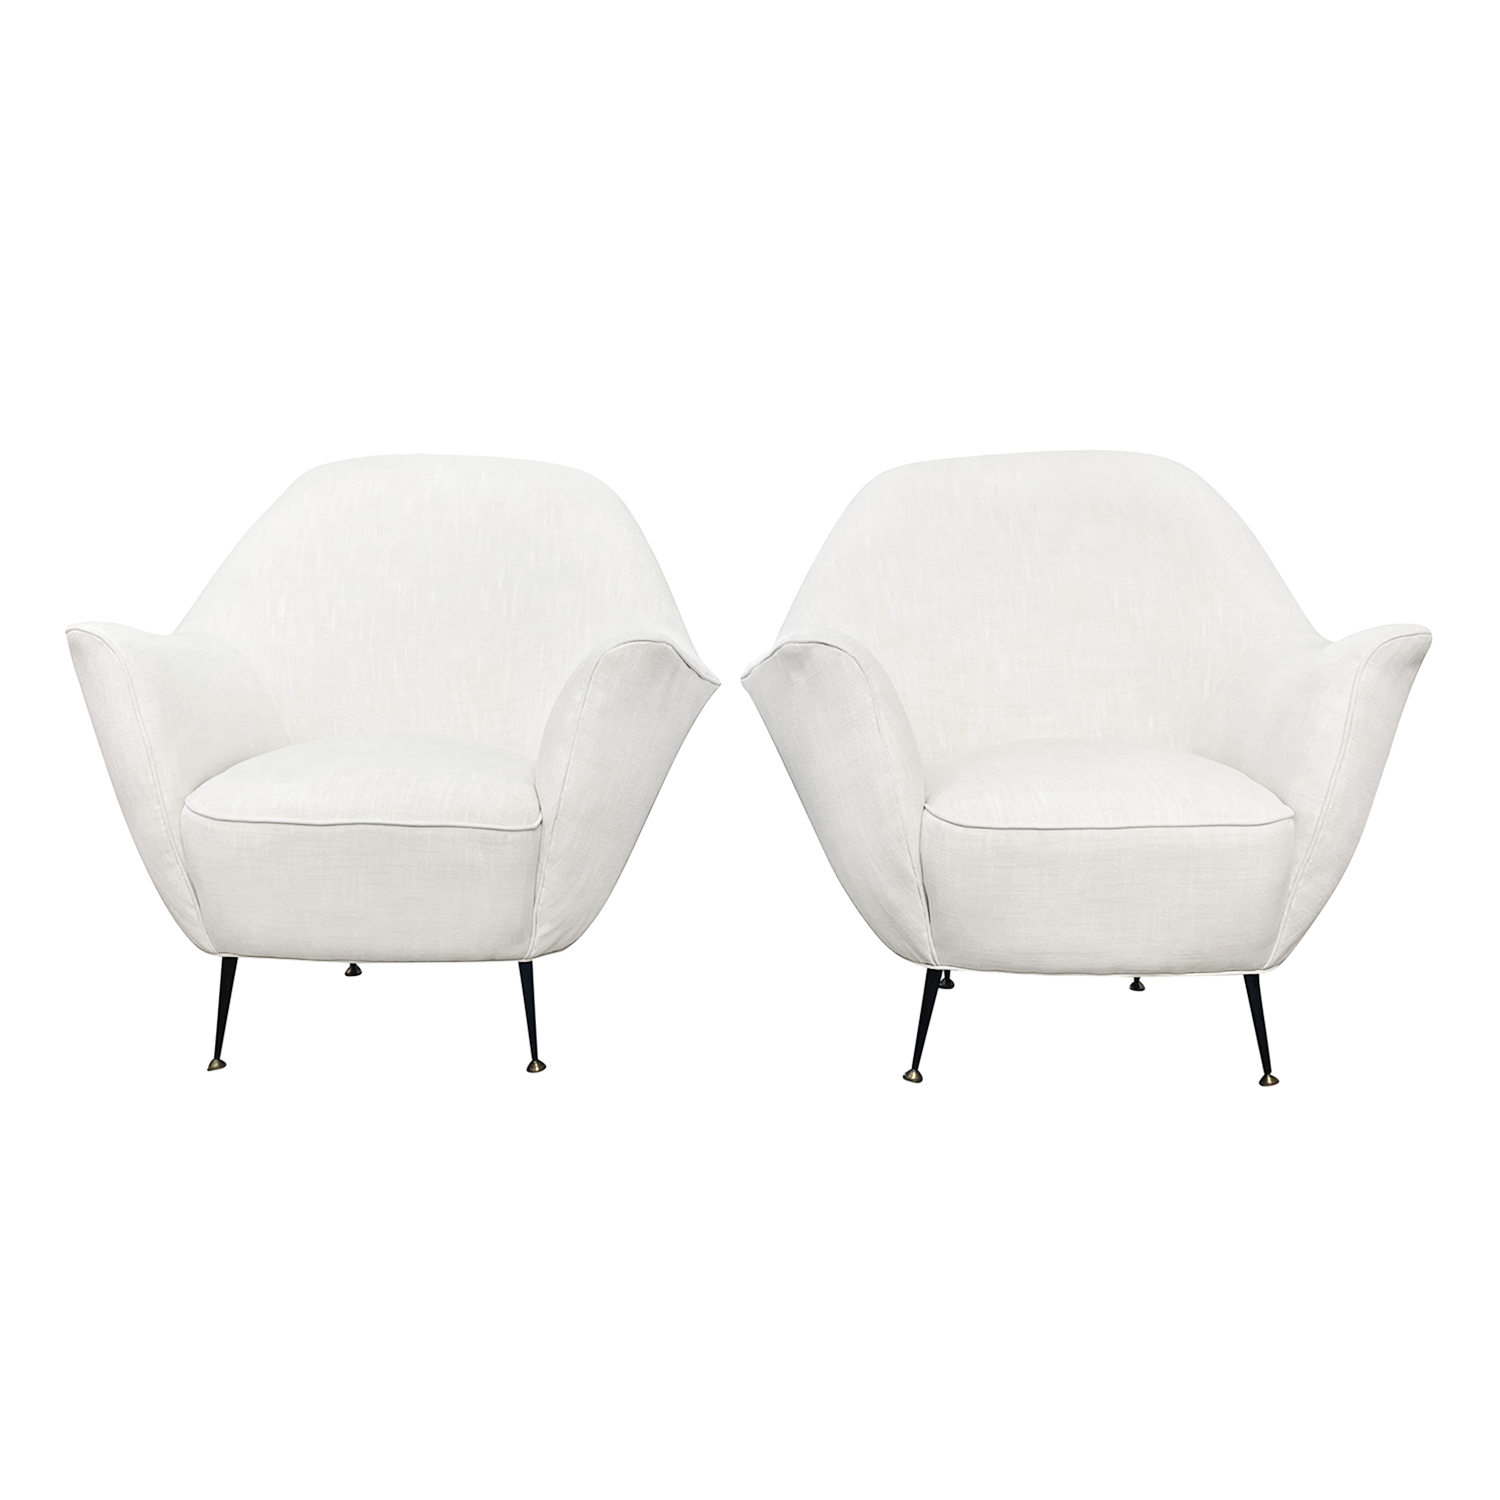 20th Century Italian Modern Pair of Vintage Sculptural Club Chairs by Ico Parisi